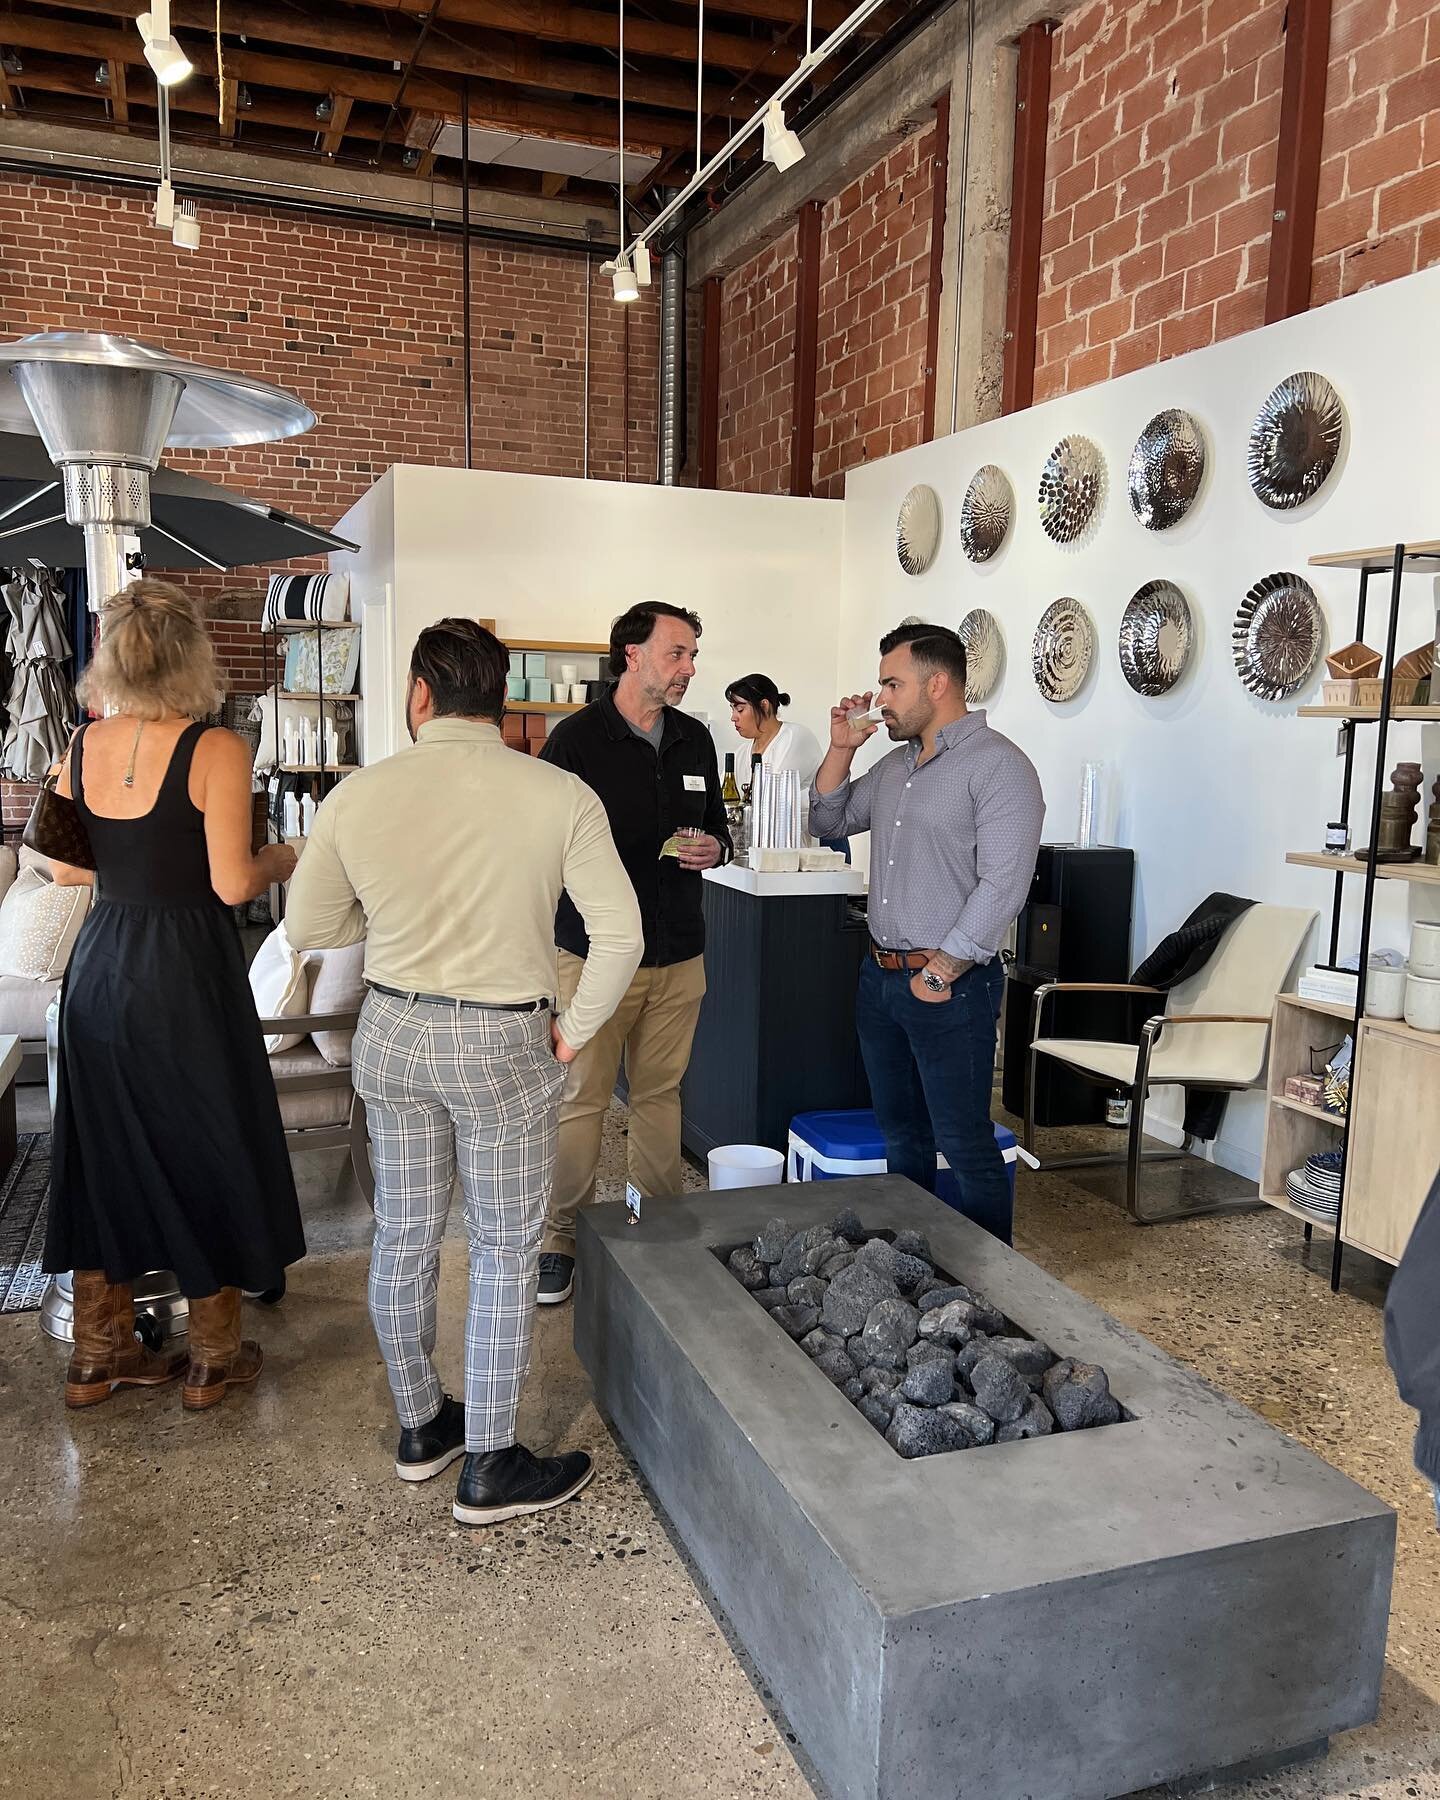 We had so much fun at our June event last night! Thanks to everyone who came and to @the_cozy_patio for hosting us in their beautiful new showroom in downtown SLO!
.
.
#CCIDSLO #thecozypatio #networking #fun #education #interiordesign #interiordesign